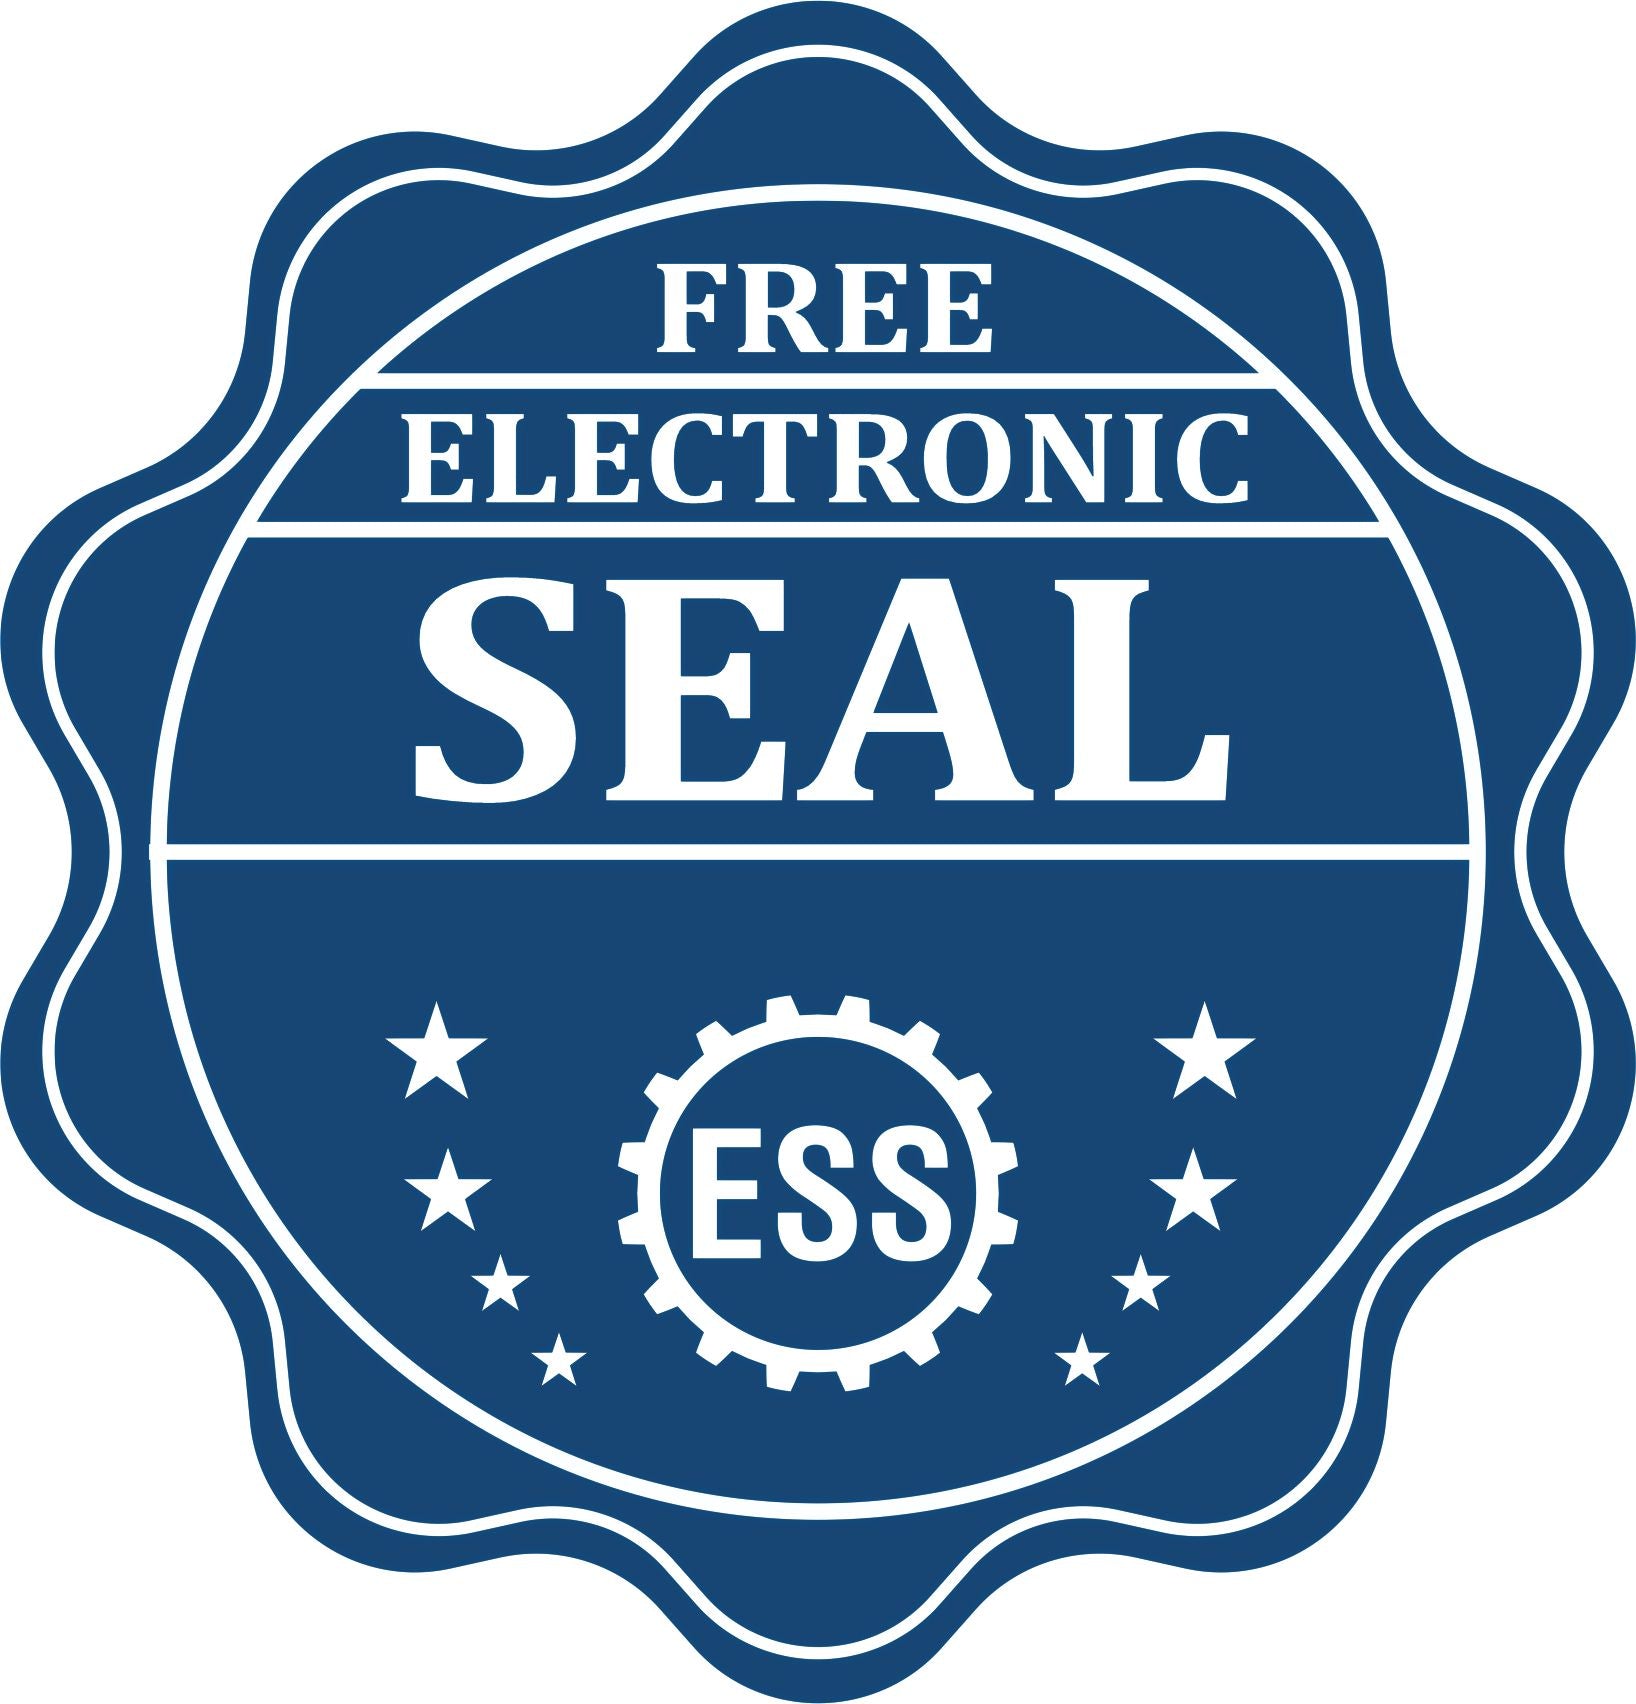 A badge showing a free electronic seal for the State of Ohio Extended Long Reach Engineer Seal with stars and the ESS gear on the emblem.